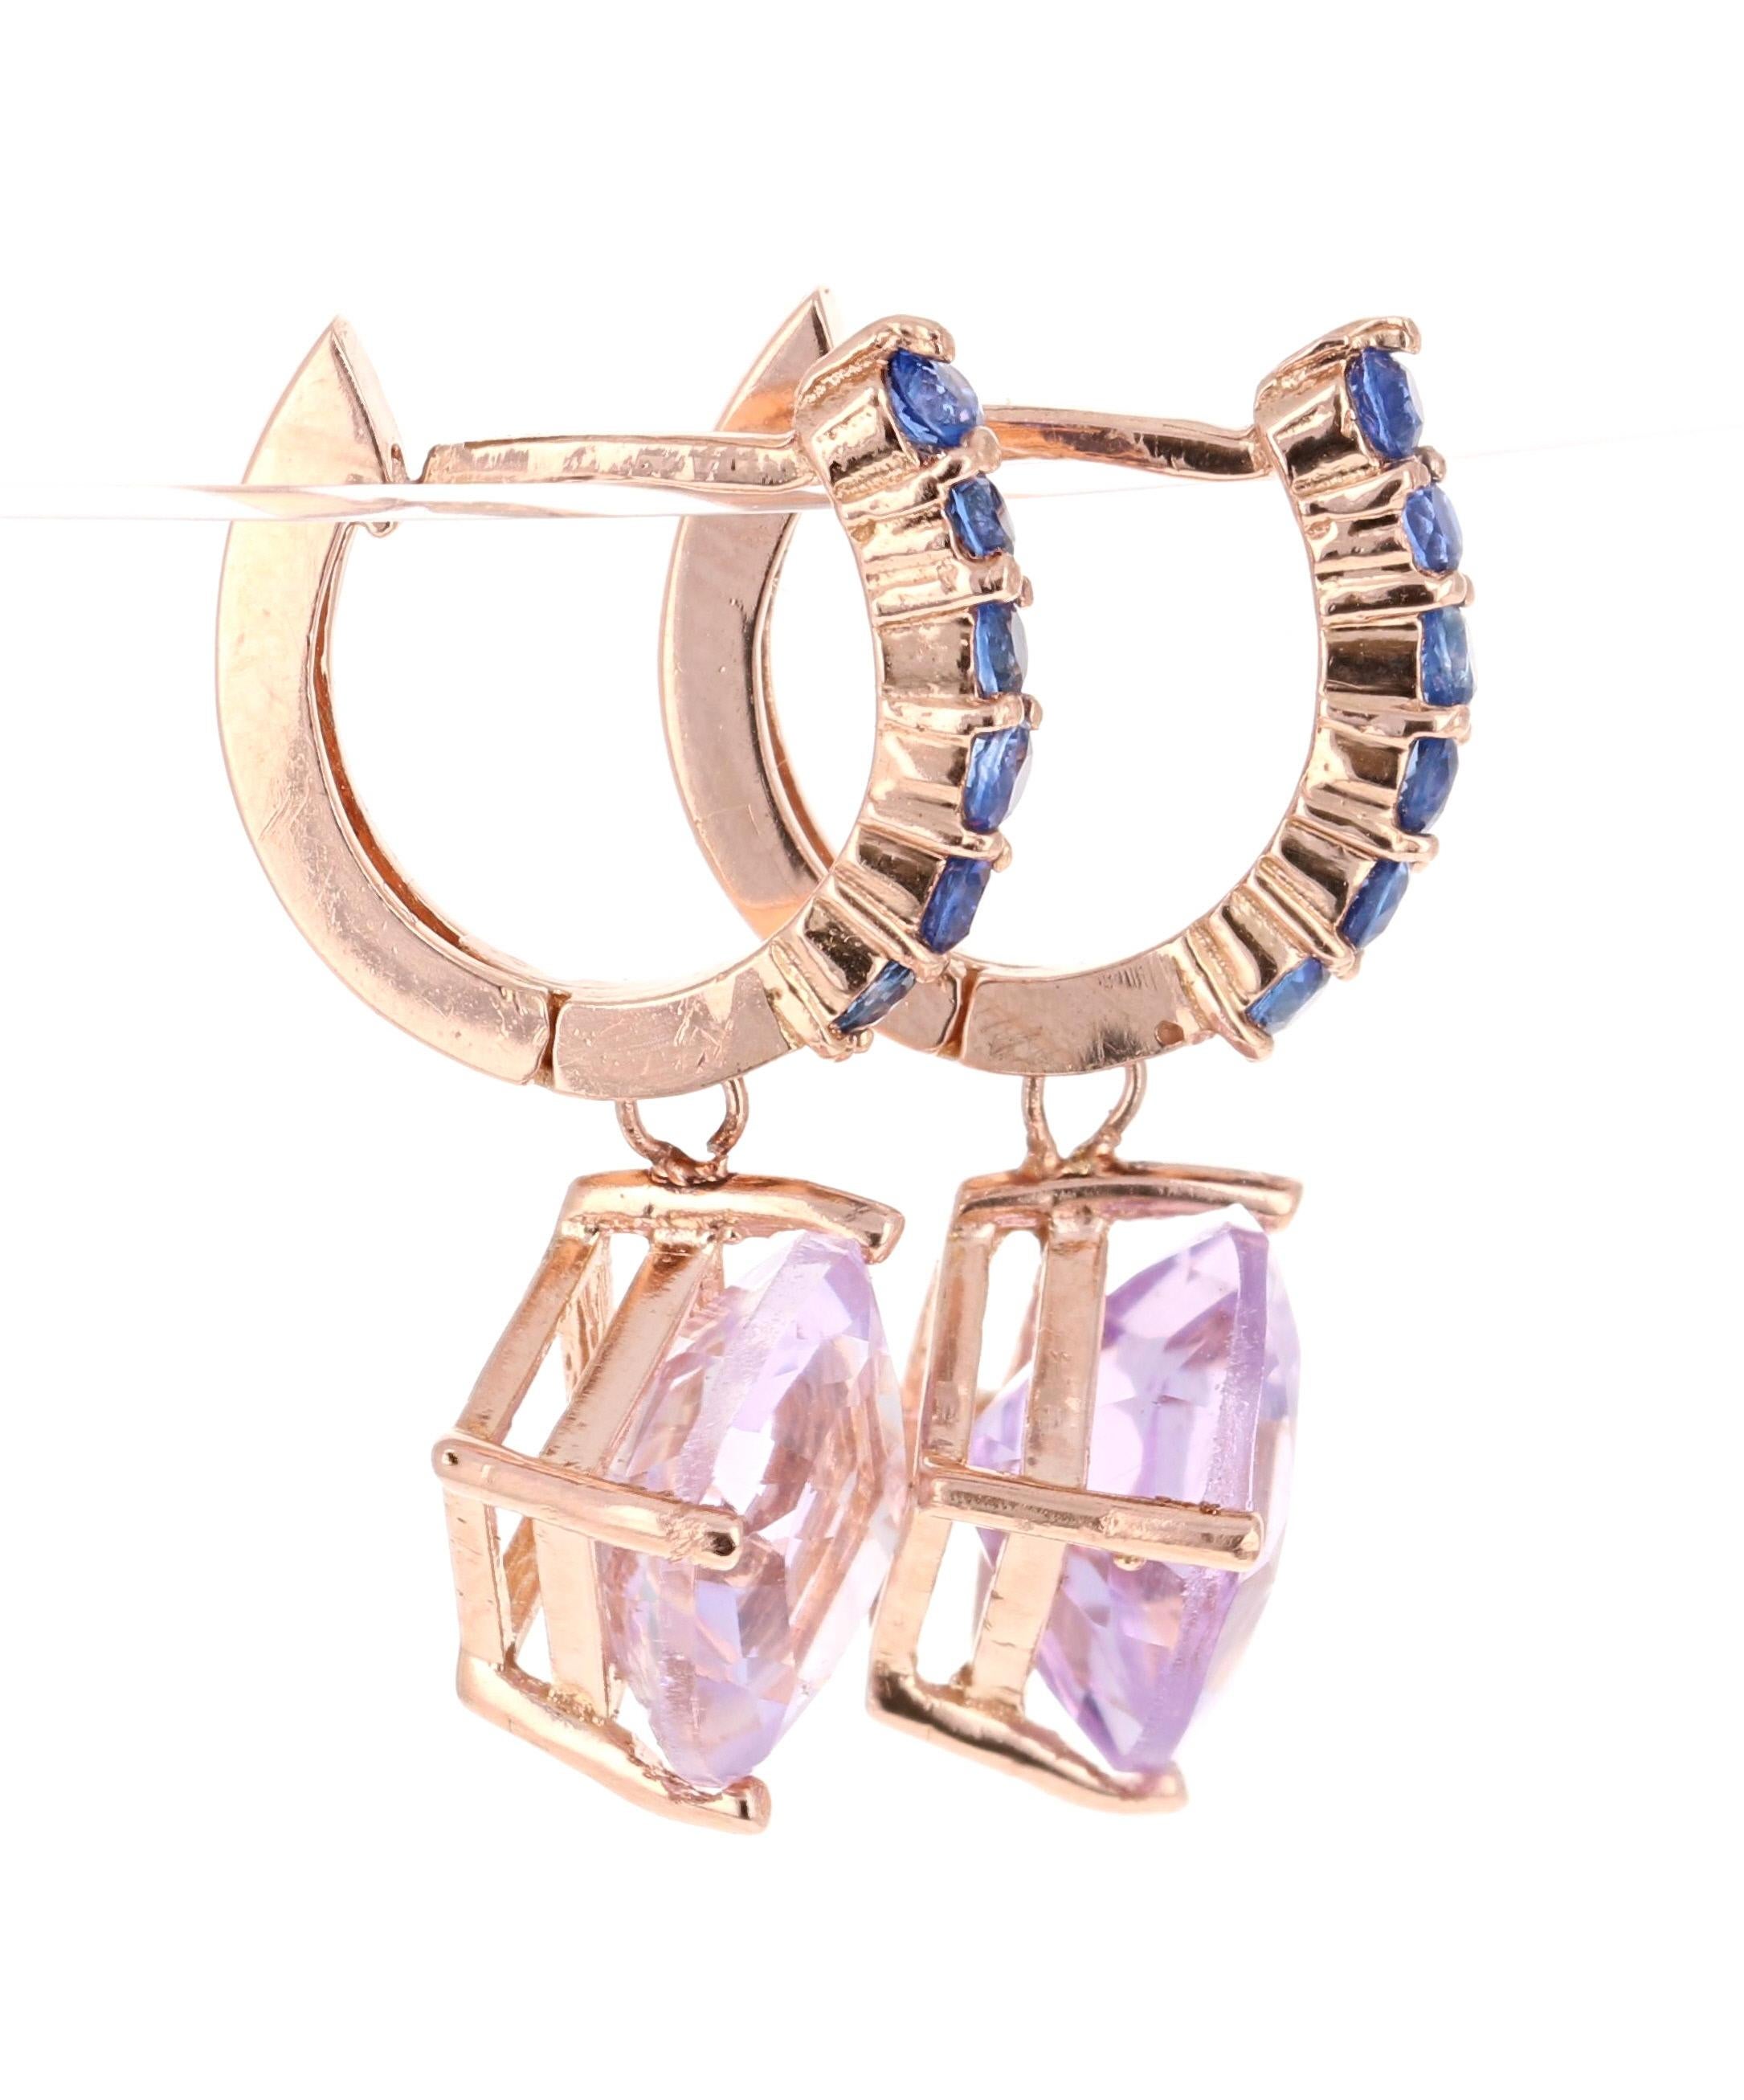 Amethyst and Blue Sapphire Drop Earrings! 

These stunning earrings have 2 Amethysts that weigh 3.80 Carats and are embellished with 12 Blue Sapphires that weigh 0.53 Carats. The total carat weight of the earrings are 4.33 Carats. 

They are